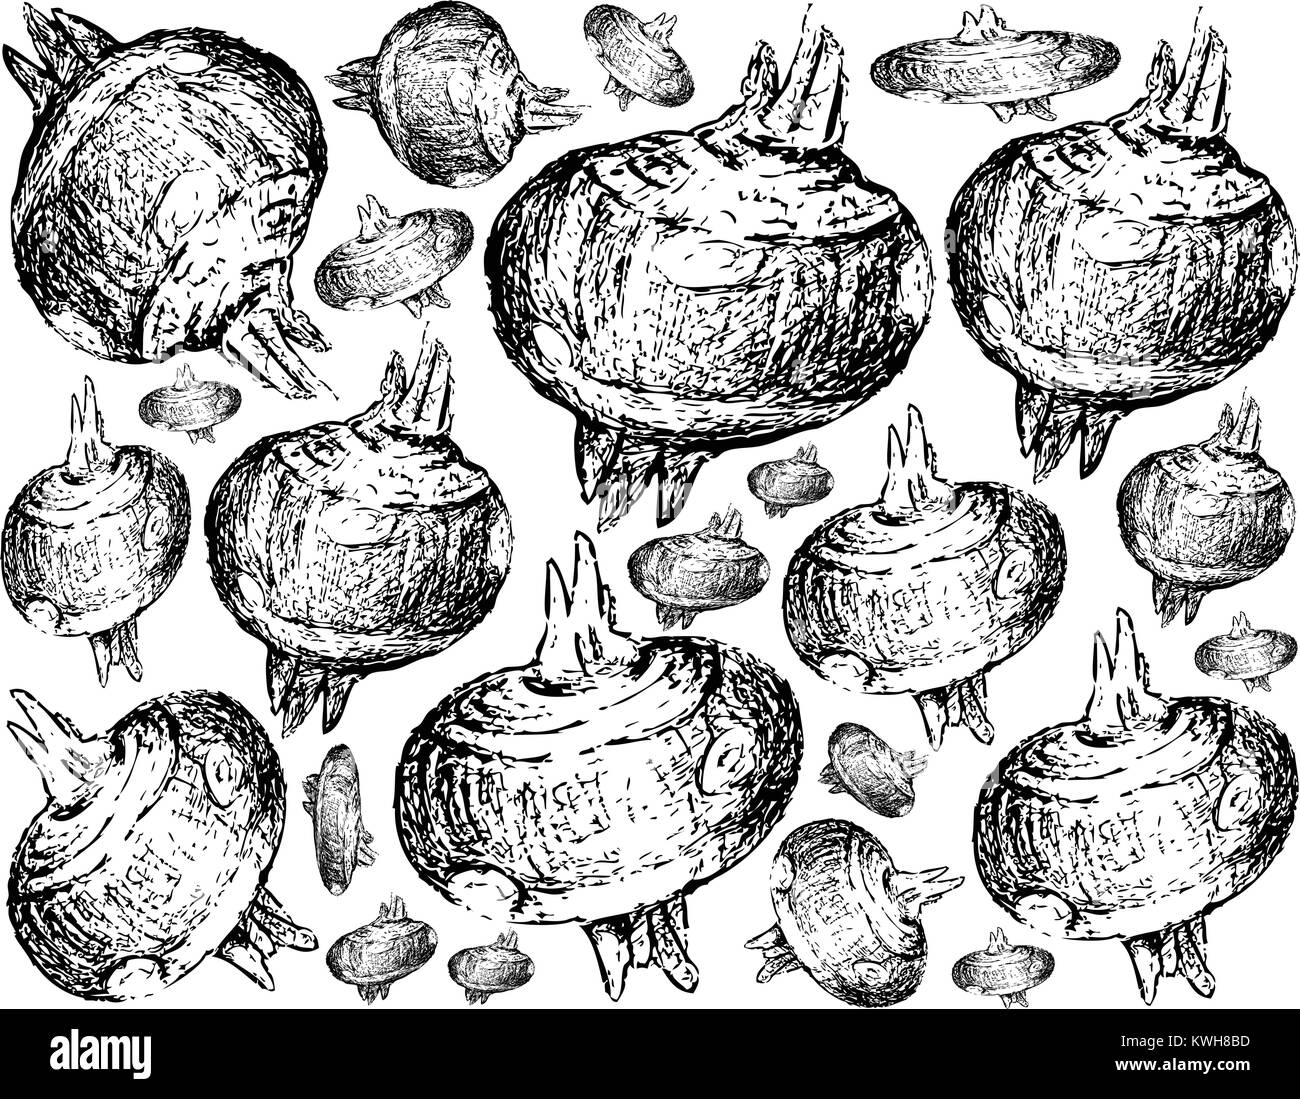 Root and Tuberous Vegetables, Illustration Hand Drawn Sketch of Water Chestnut or Eleocharis Dulcis Plant on White Background. Good Source of Dietary  Stock Vector